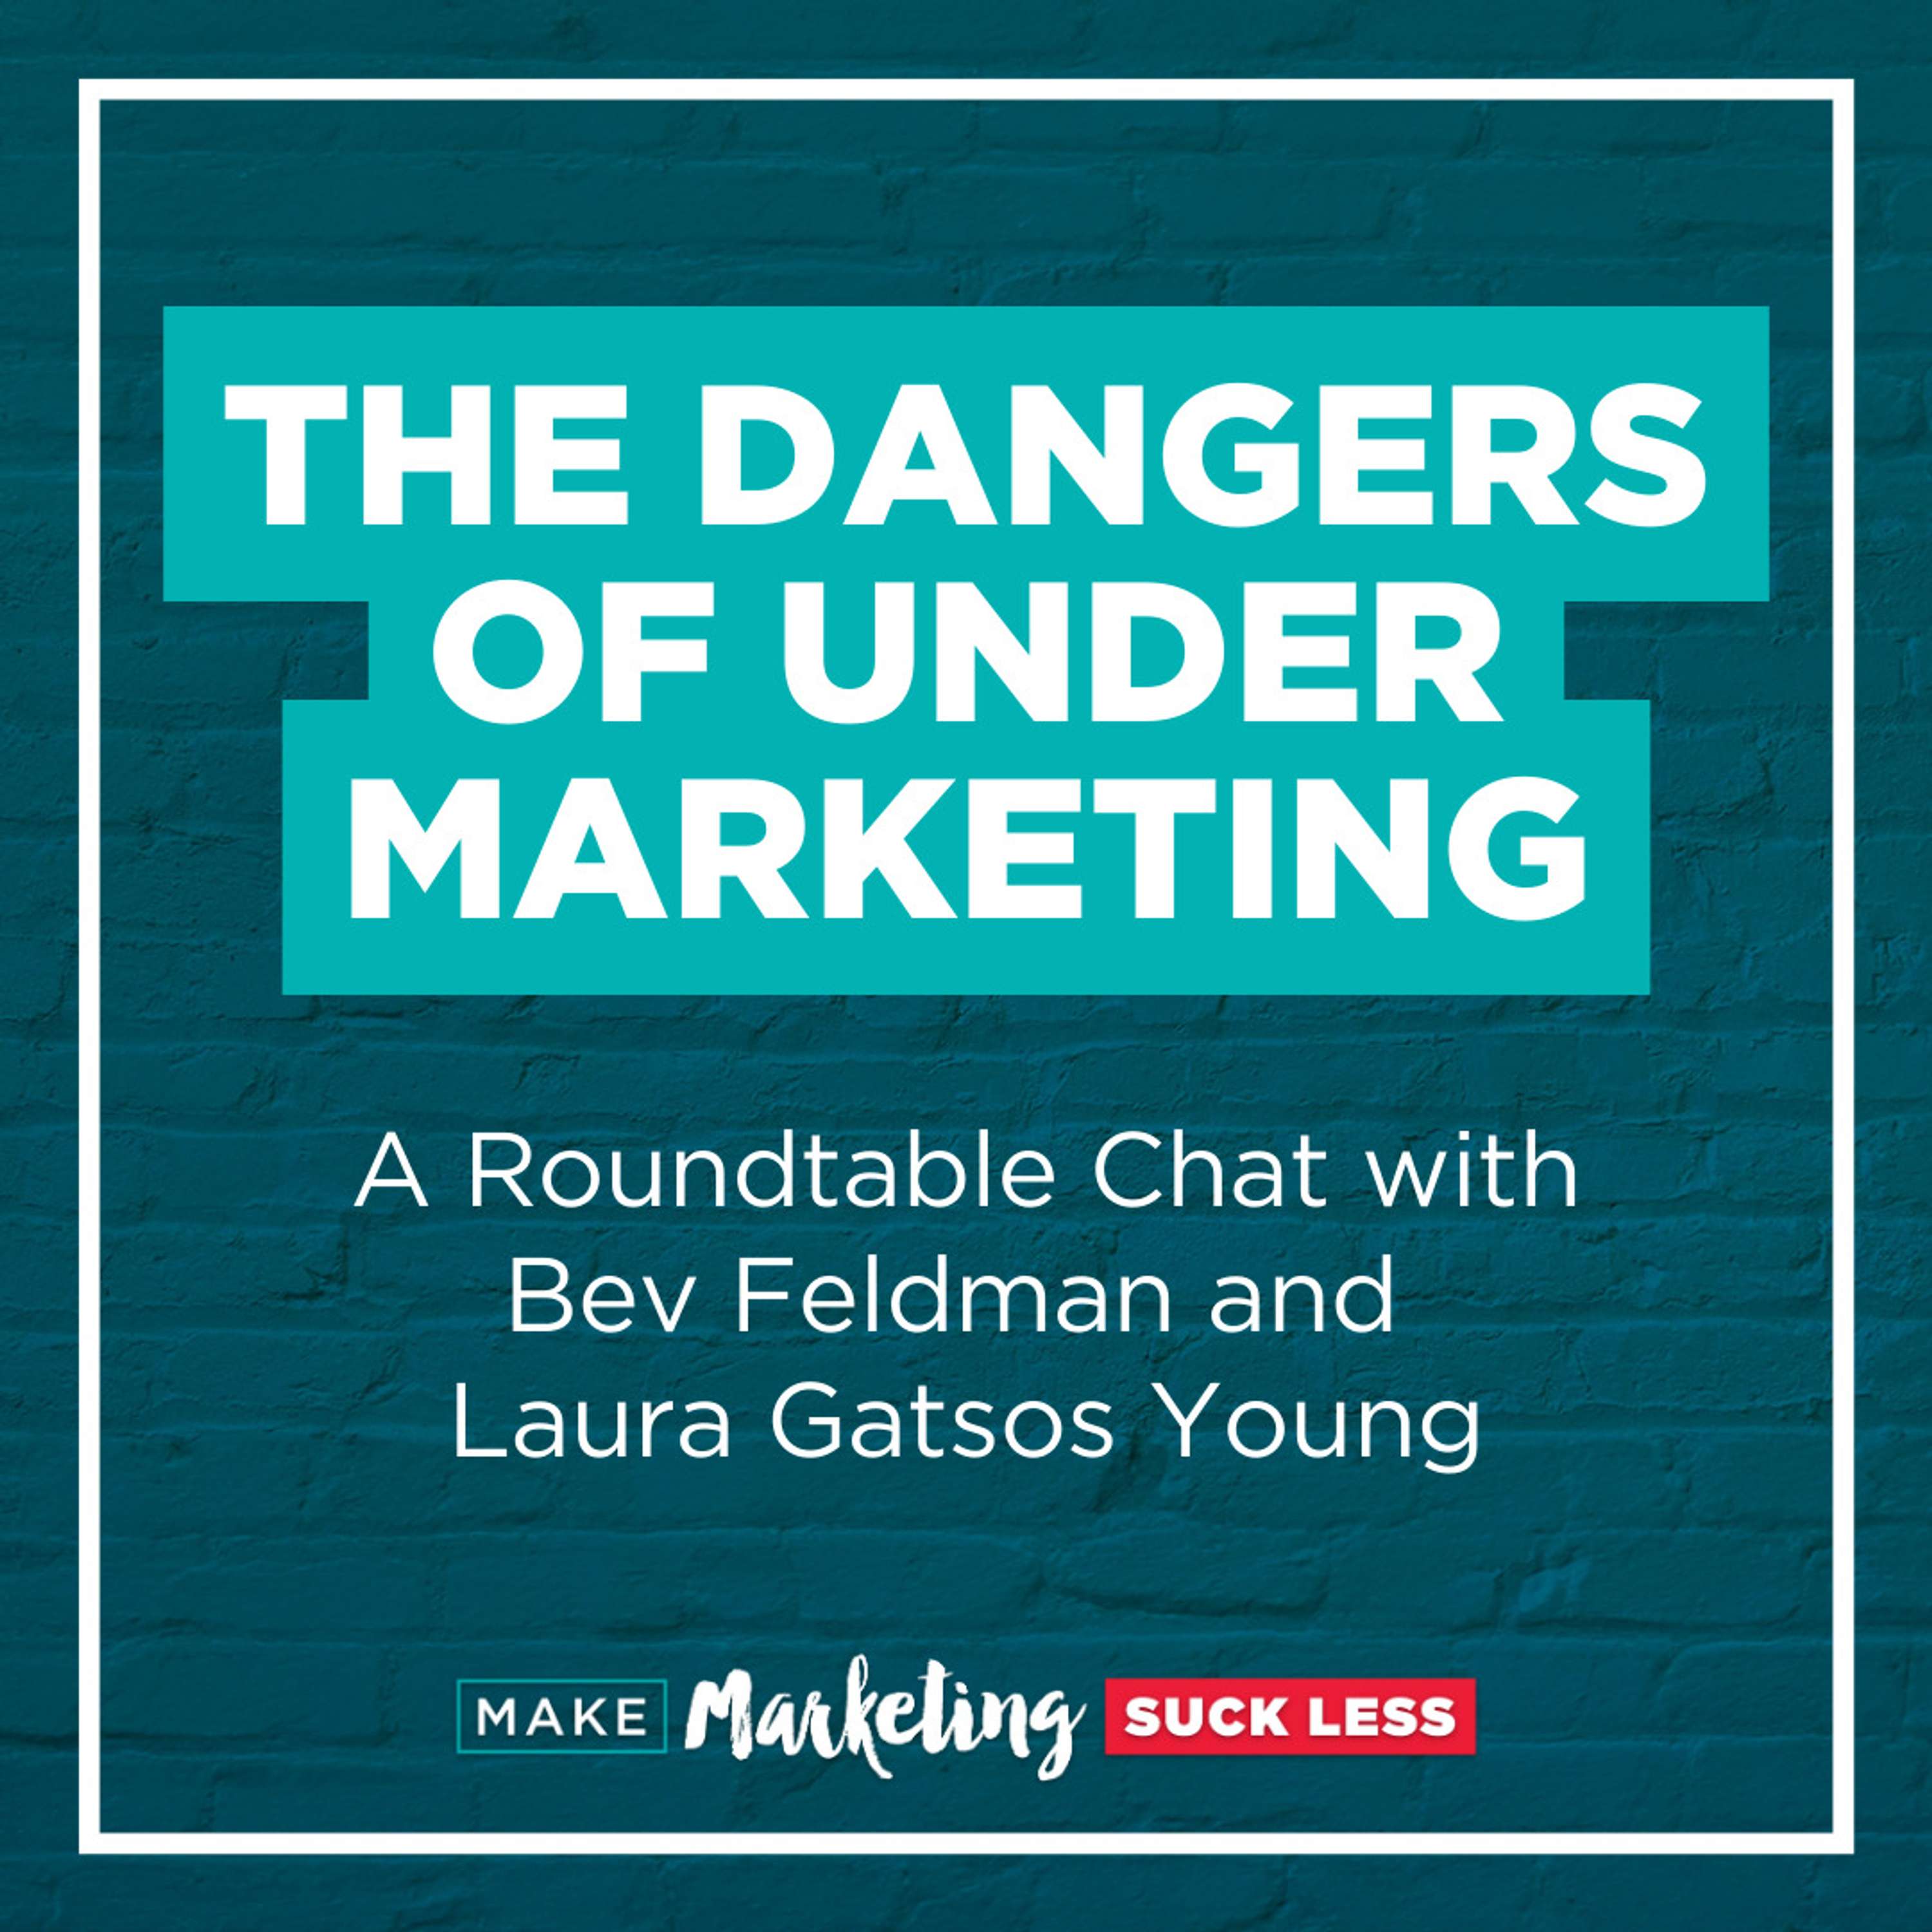 The Dangers of Under Marketing:  A roundtable chat with Bev Feldman and Laura Gatsos Young